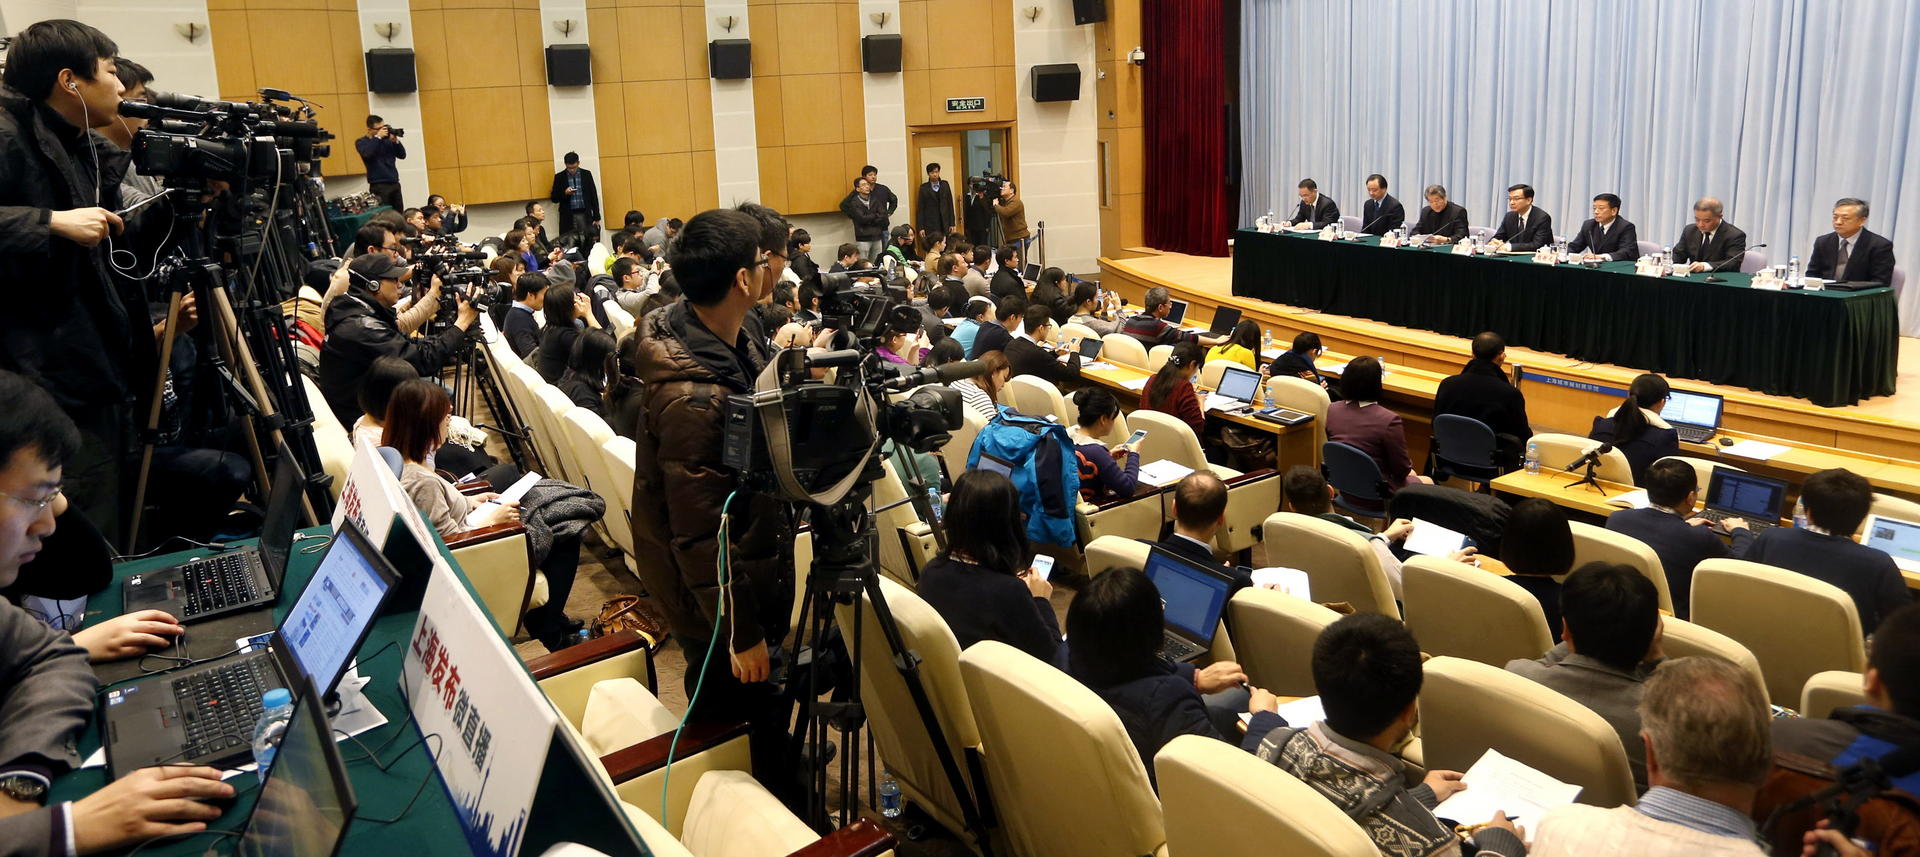 Investigators present their findings on the Shanghai stampede at a press conference yesterday. Photo: Xinhua